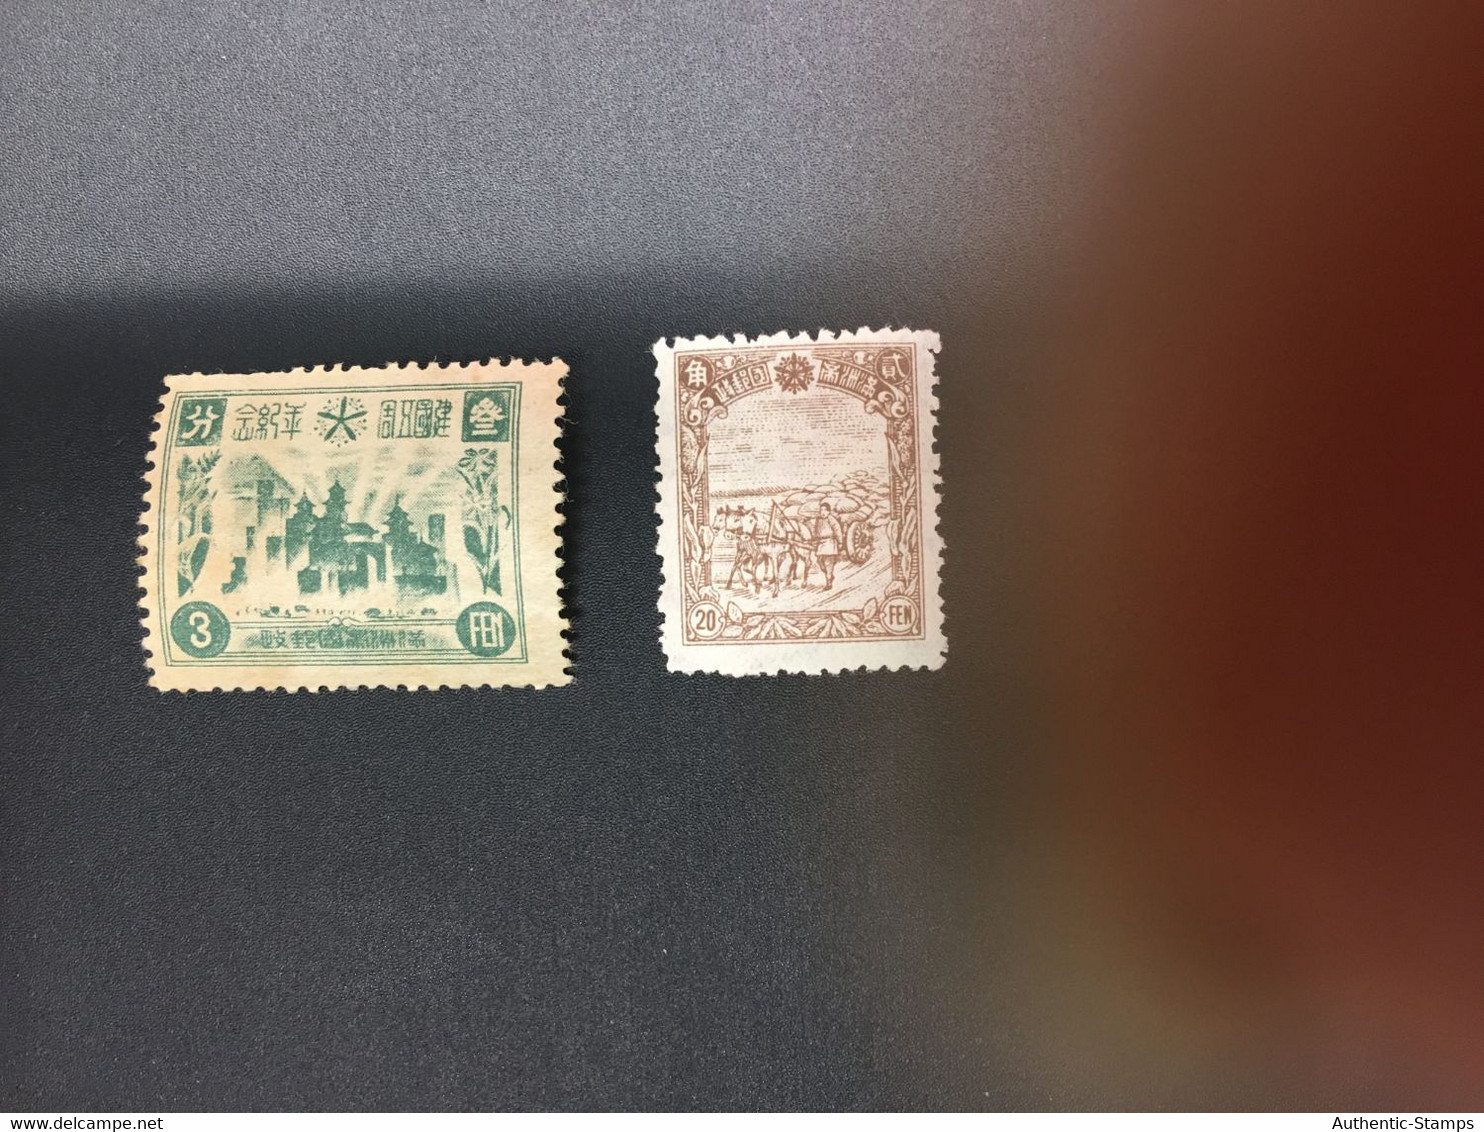 CHINA STAMP,  TIMBRO, STEMPEL,  CINA, CHINE, LIST 8571 - 1932-45 Mandchourie (Mandchoukouo)